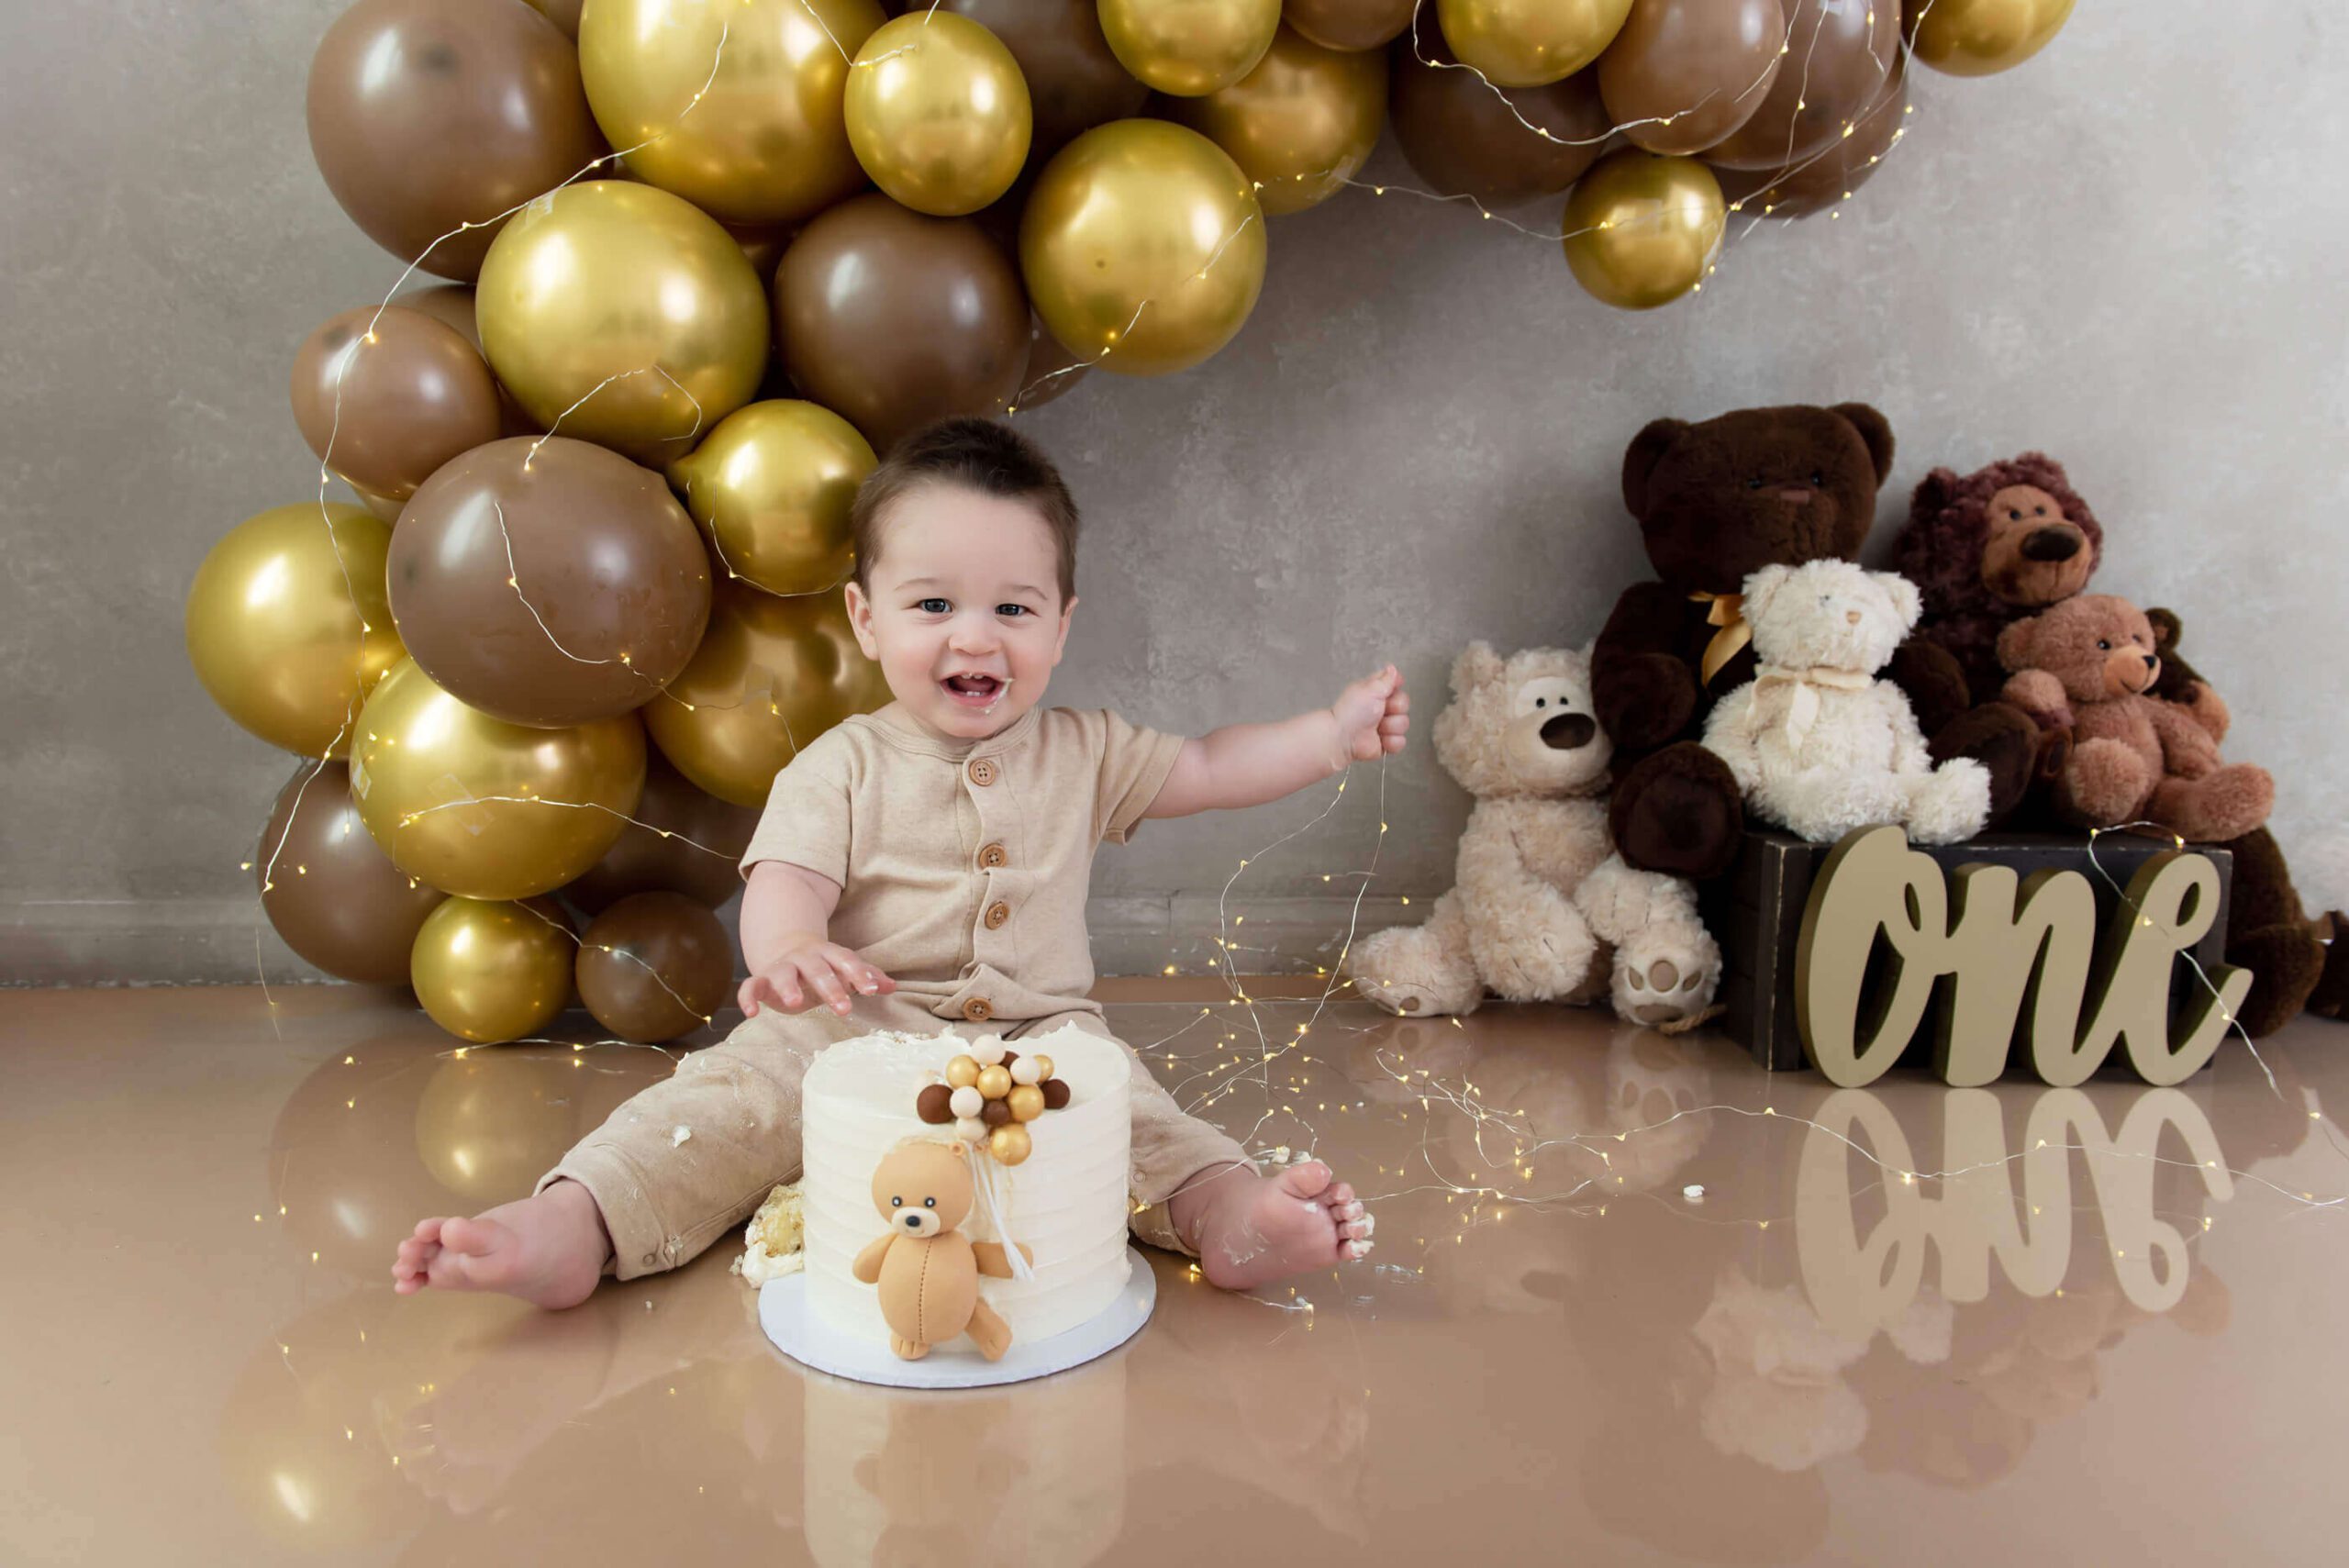 Teddybear brown and gold cake smash photography session